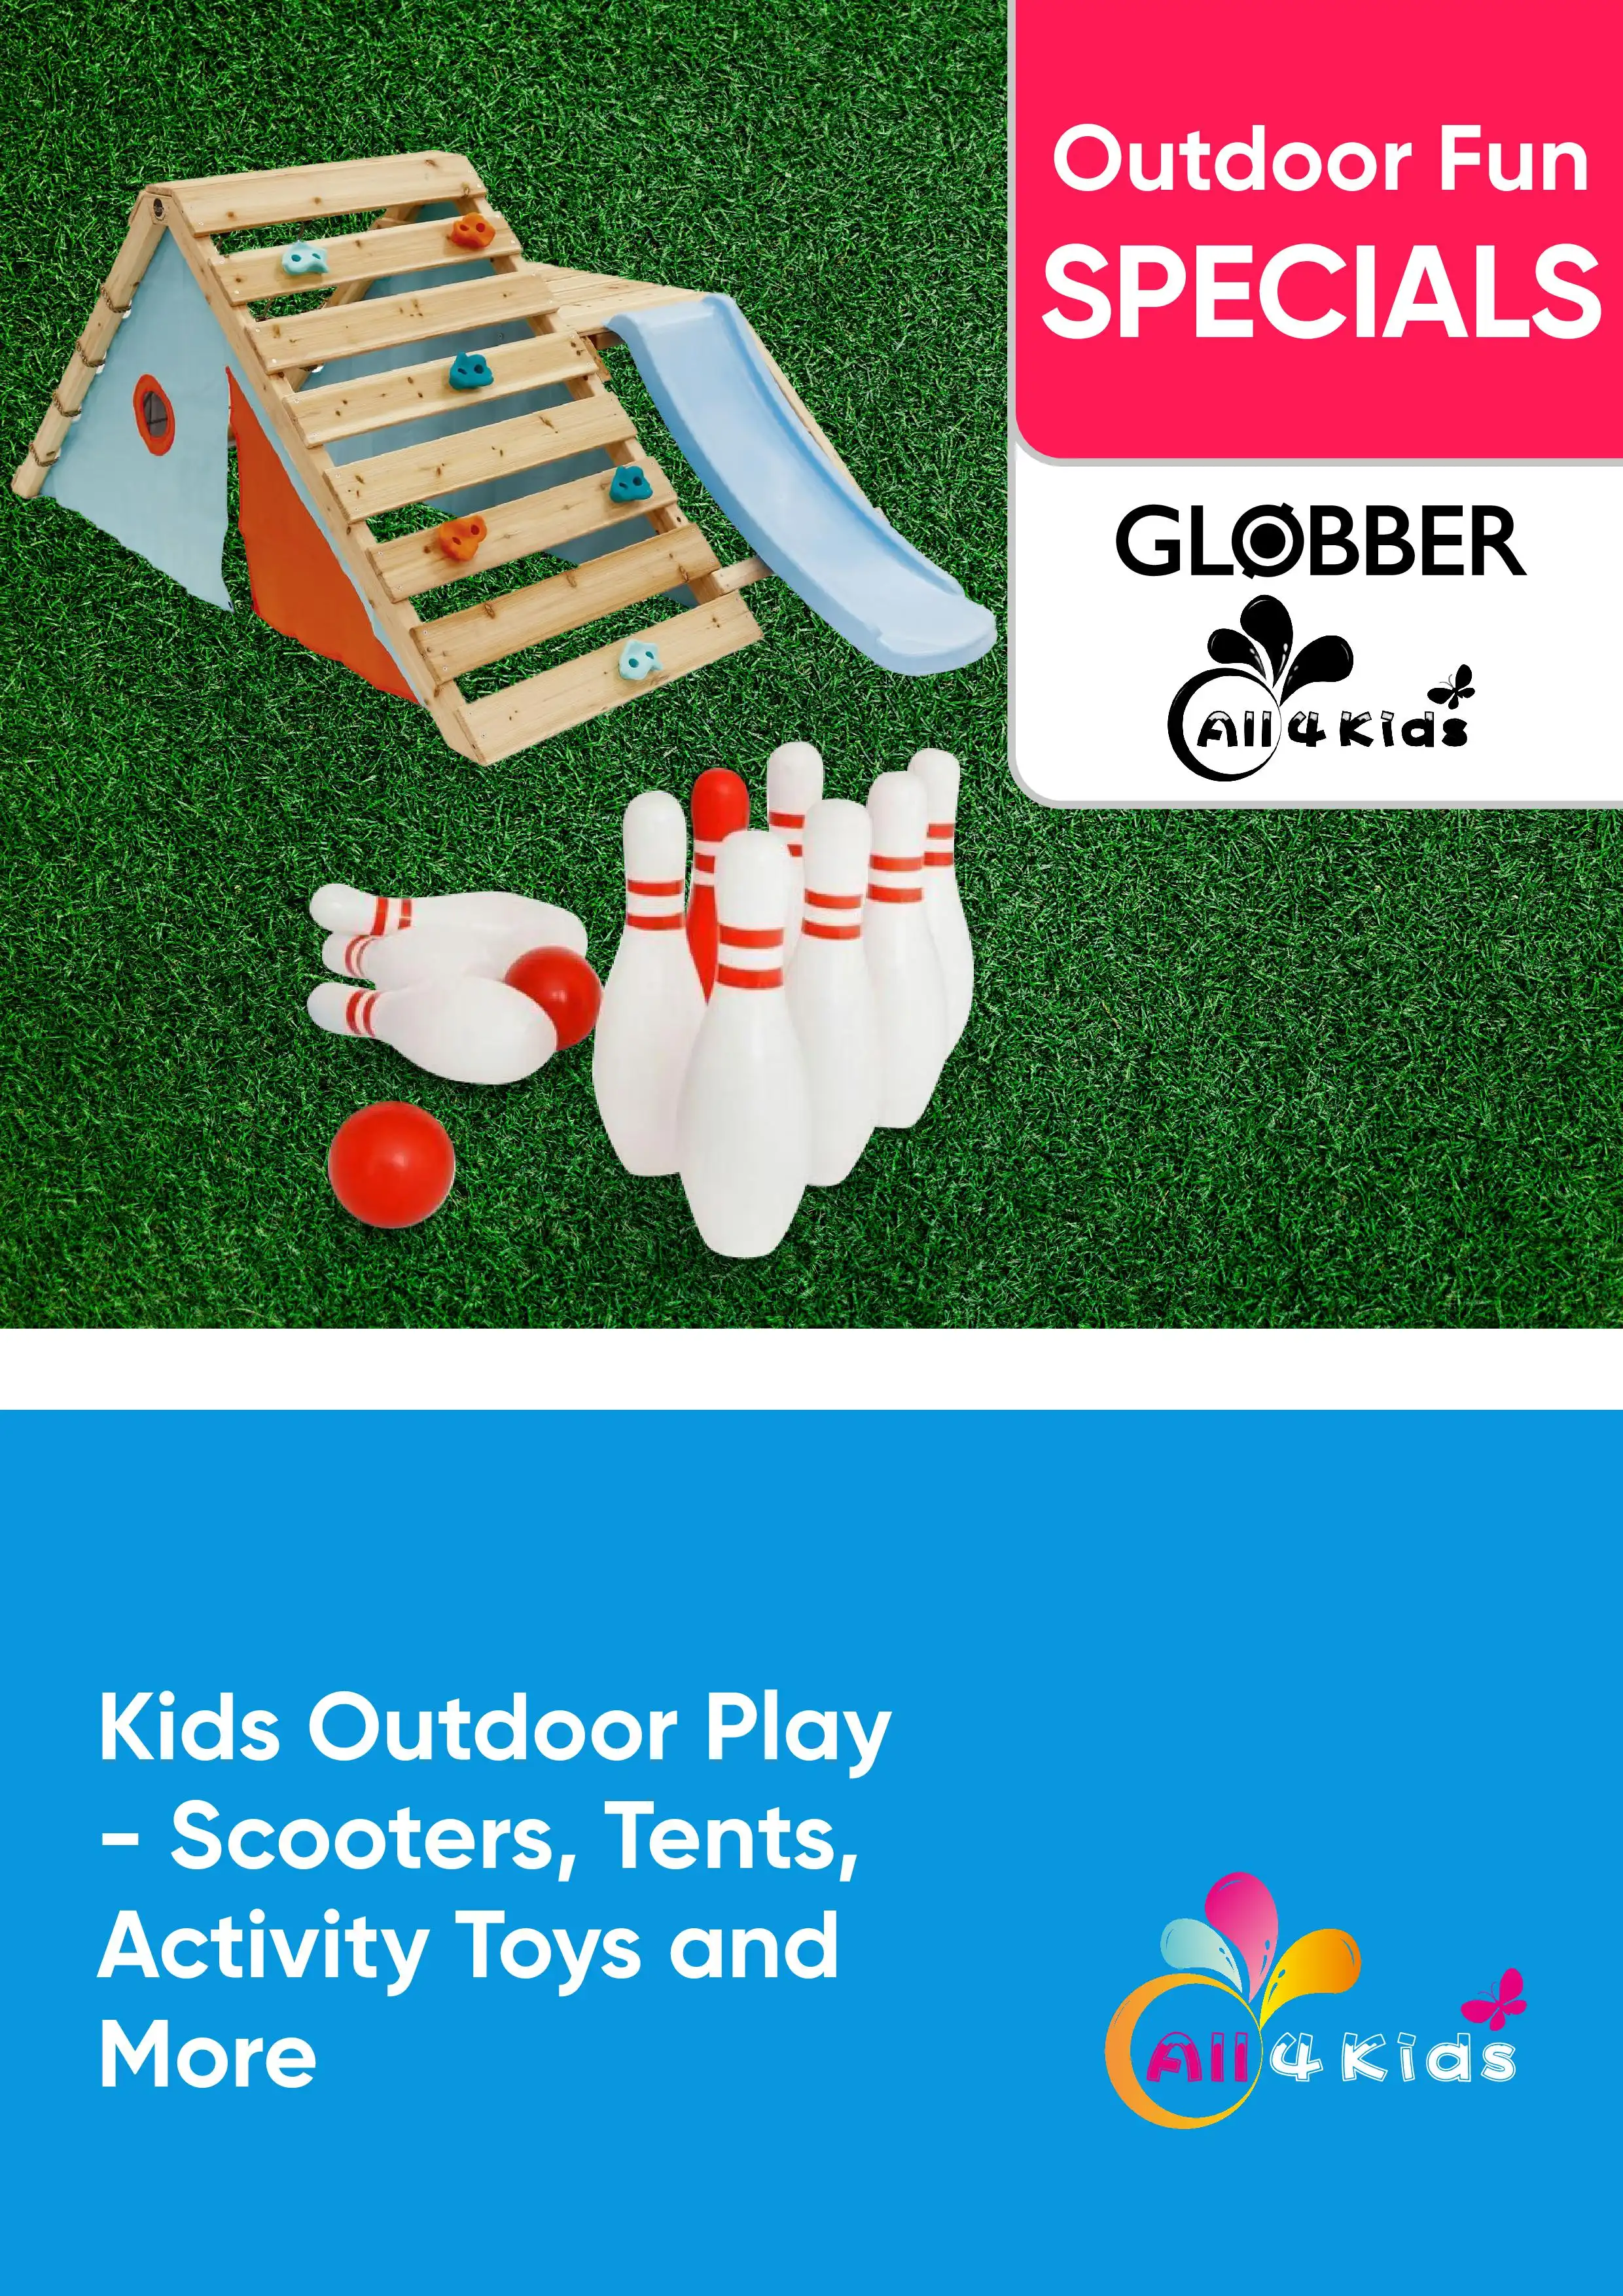 Kids Outdoor Play - Scooters, Tents, Activity Toys and More